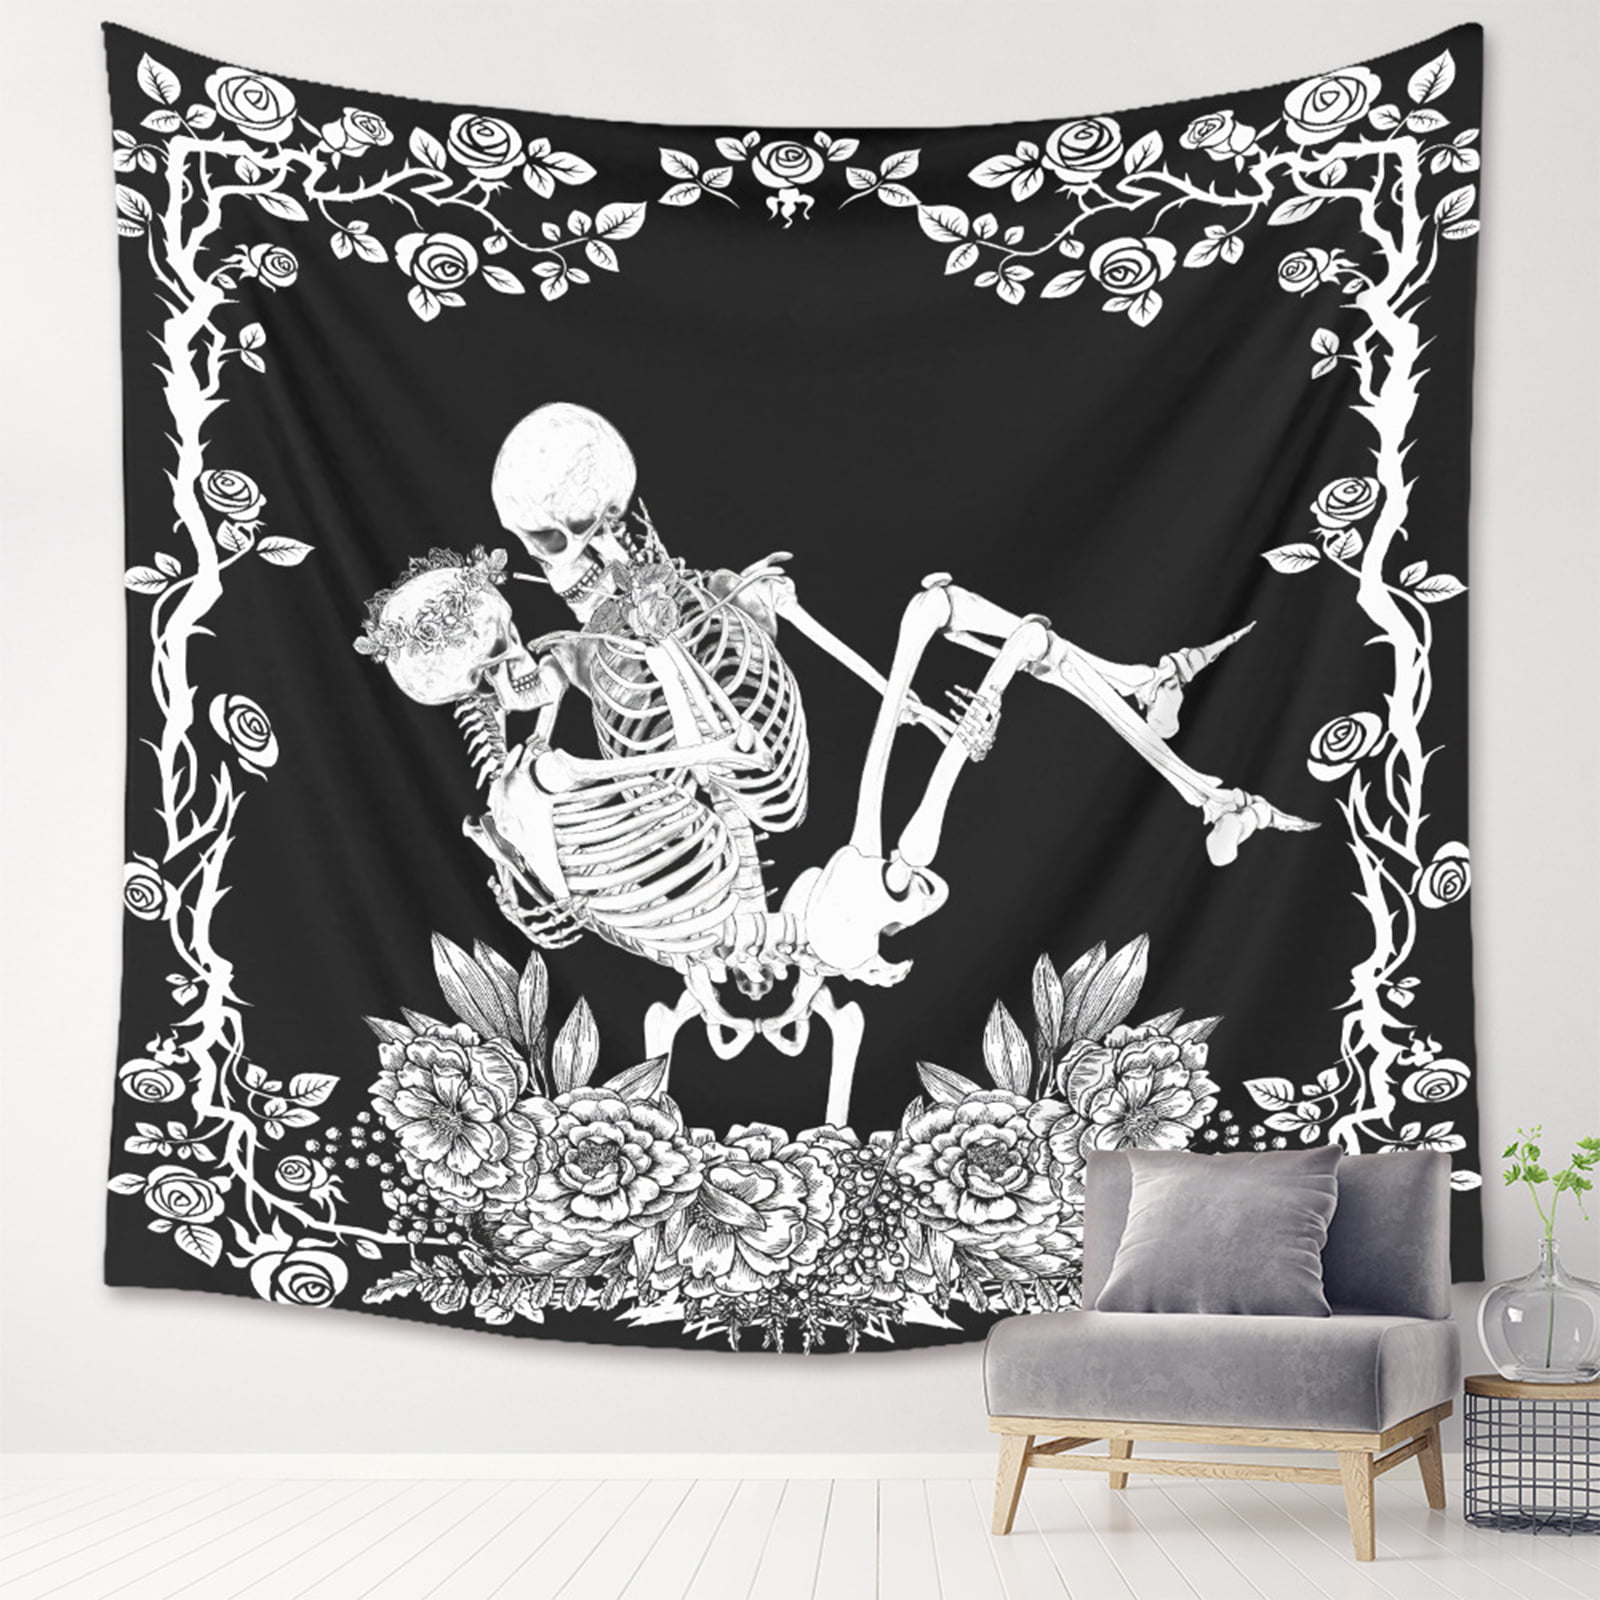 The Kissing Lovers Skull Tapestry Psychedelic Wall Hanging Home Blanket Tapestry 